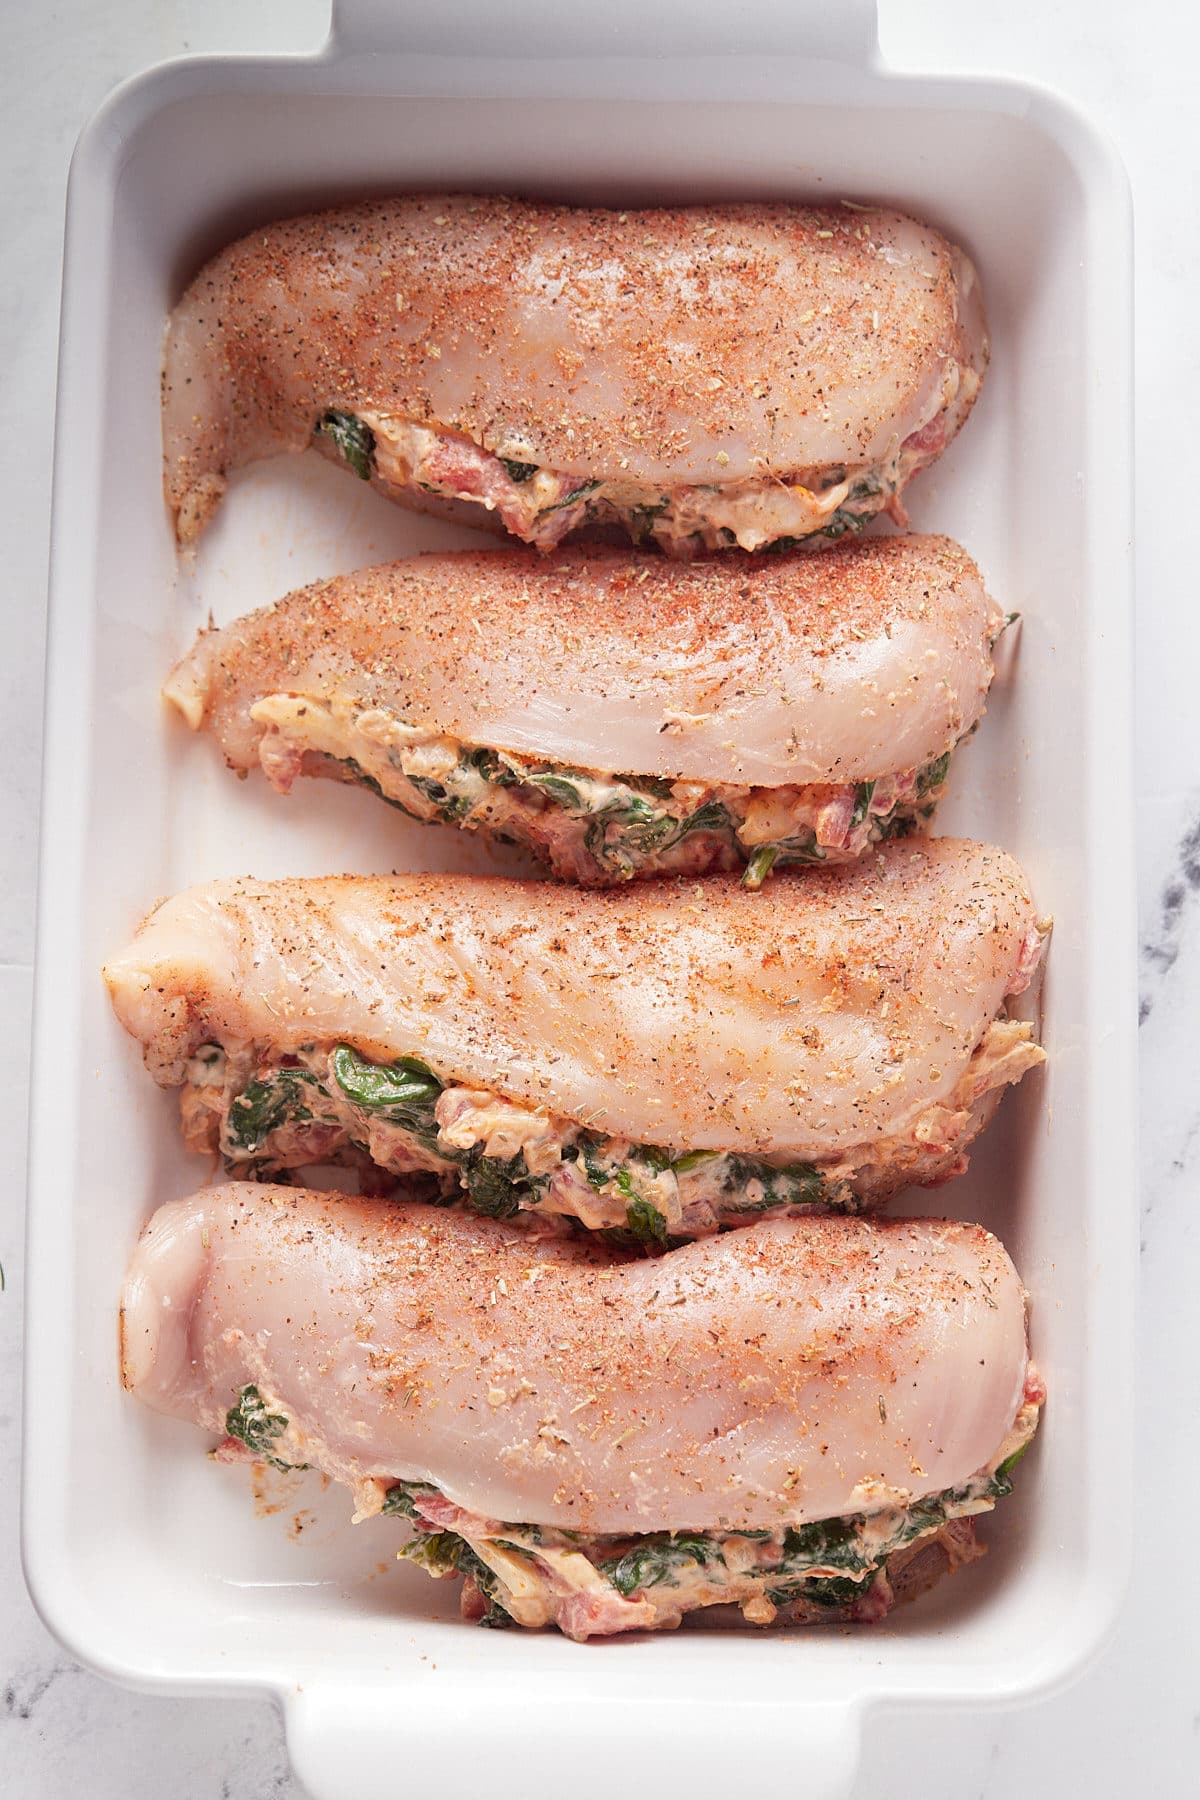 Four chicken breasts stuffed with cream cheese and spinach in a white baking dish.